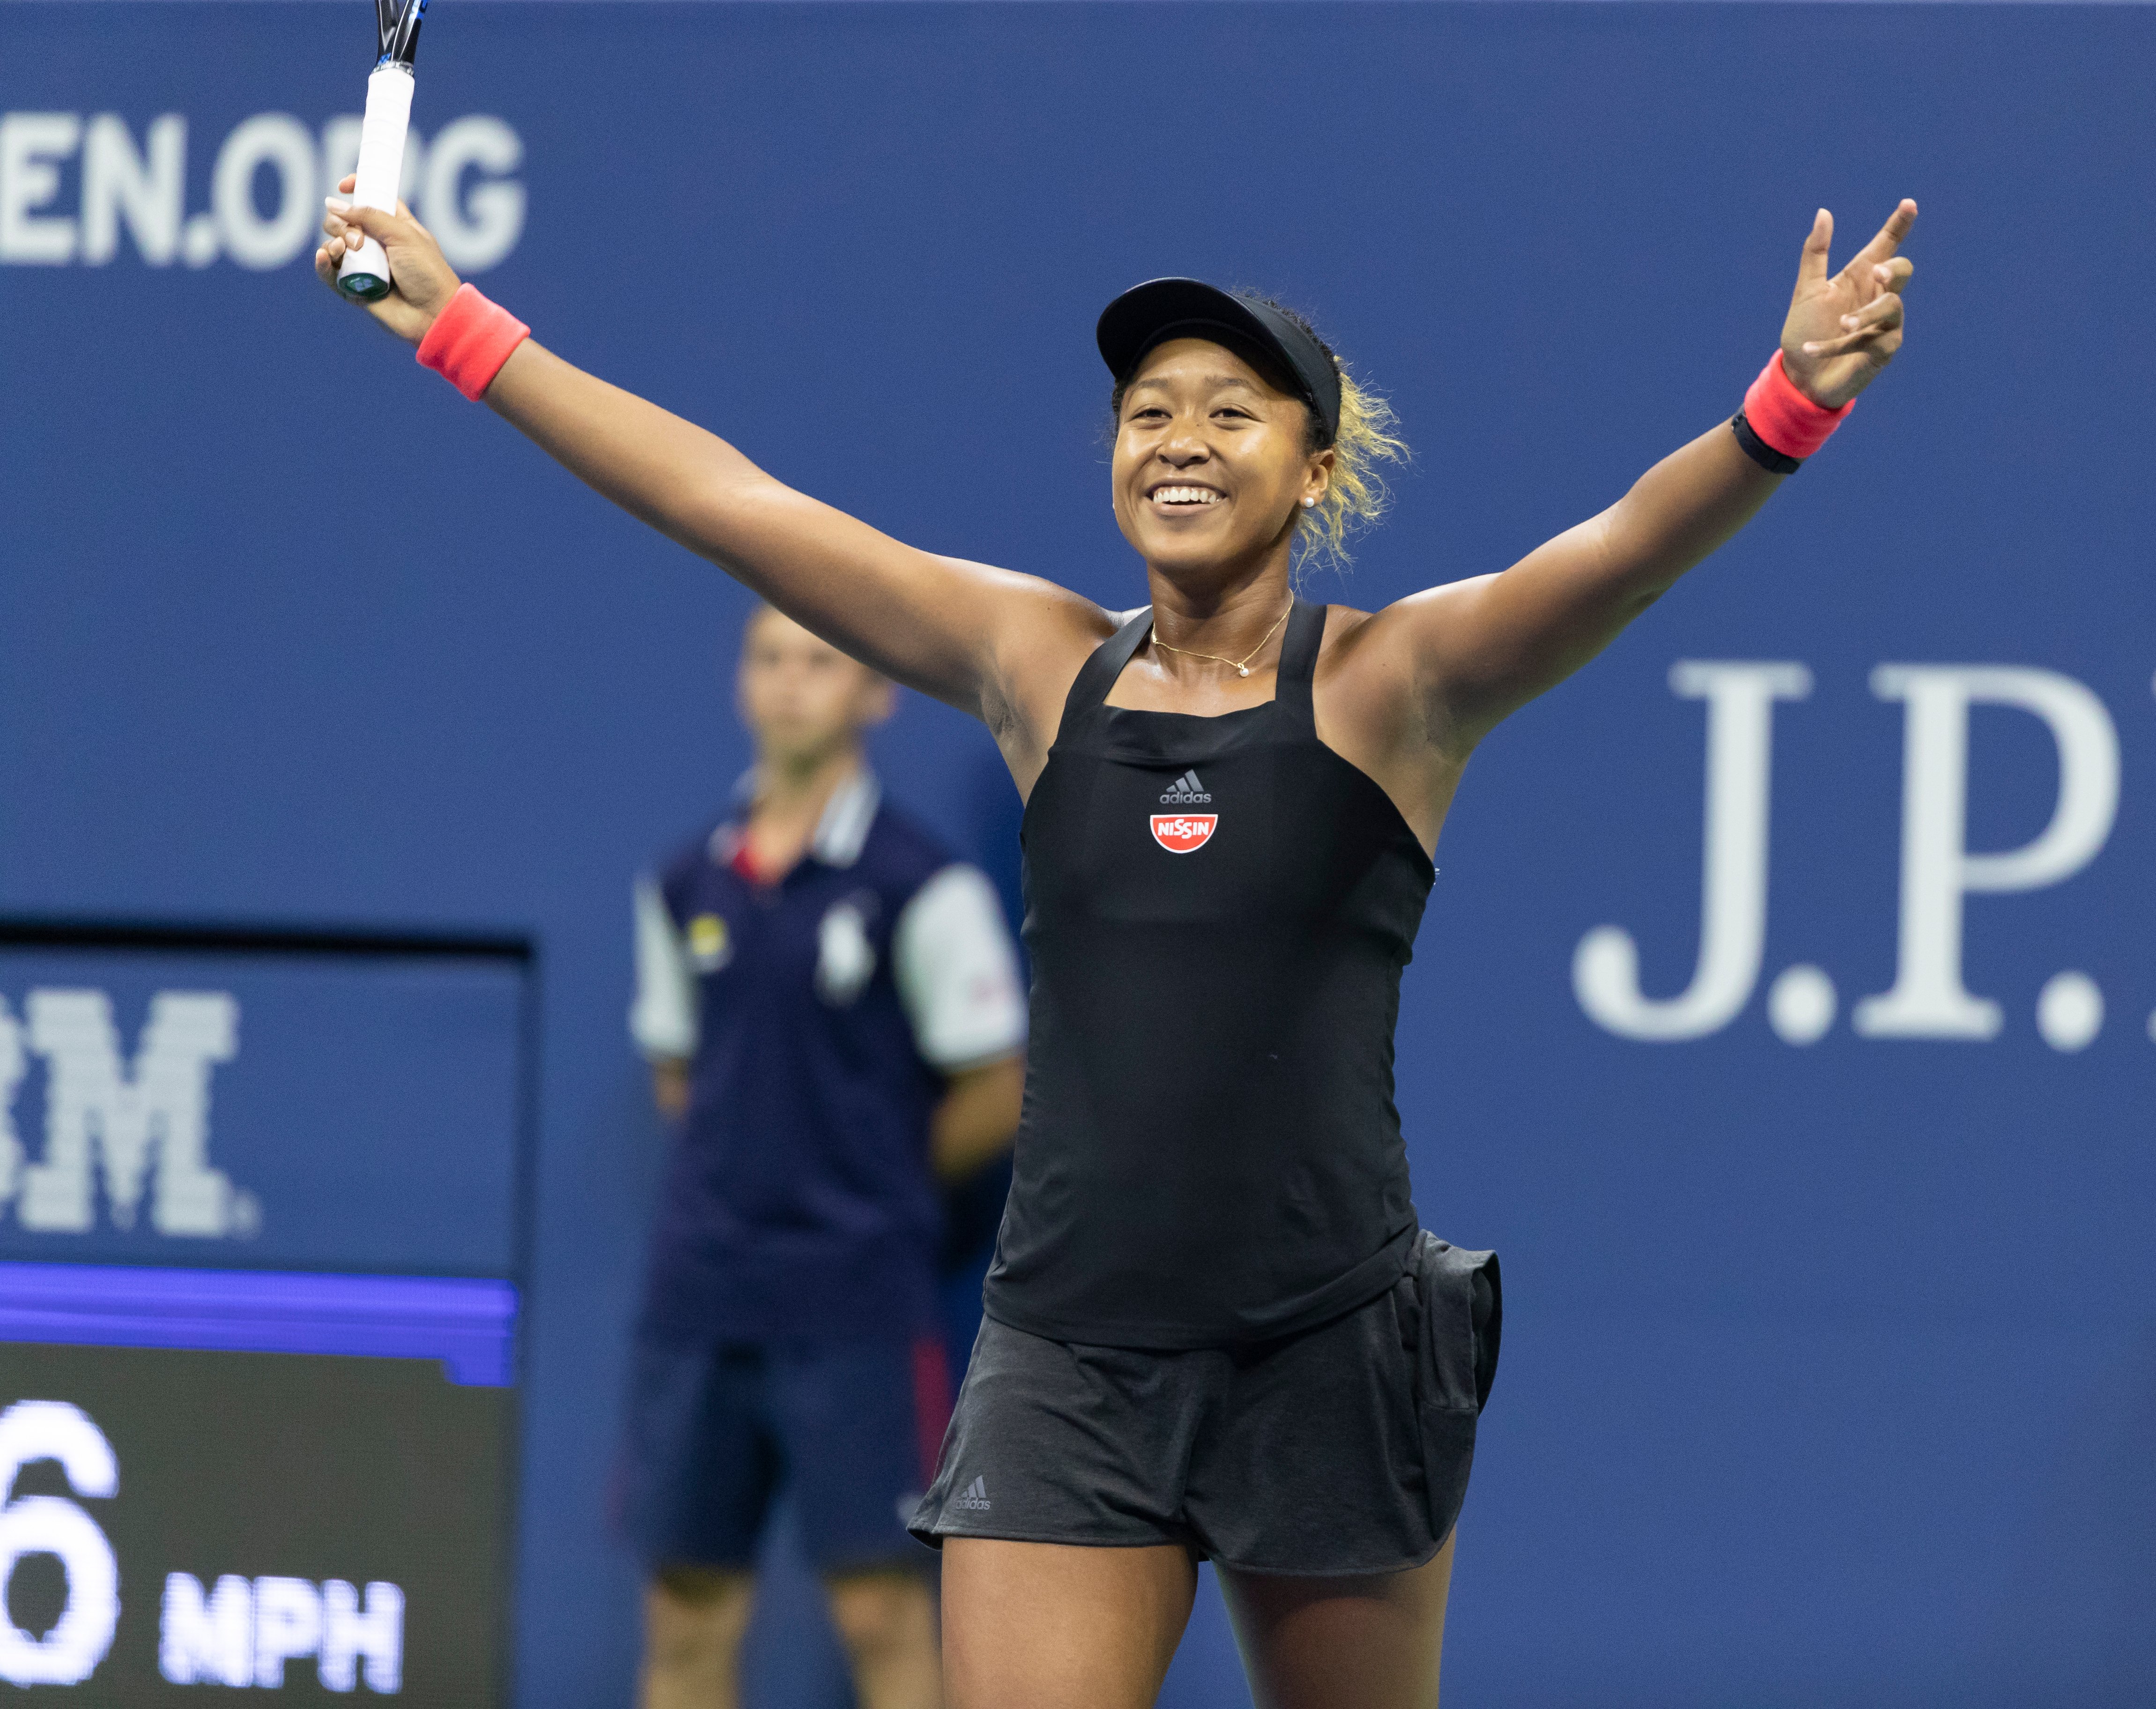 Naomi Osaka celebrates a victory in the US Open 2018 semifinal match at USTA Billie Jean King National Tennis Center. | Source: Shutterstock